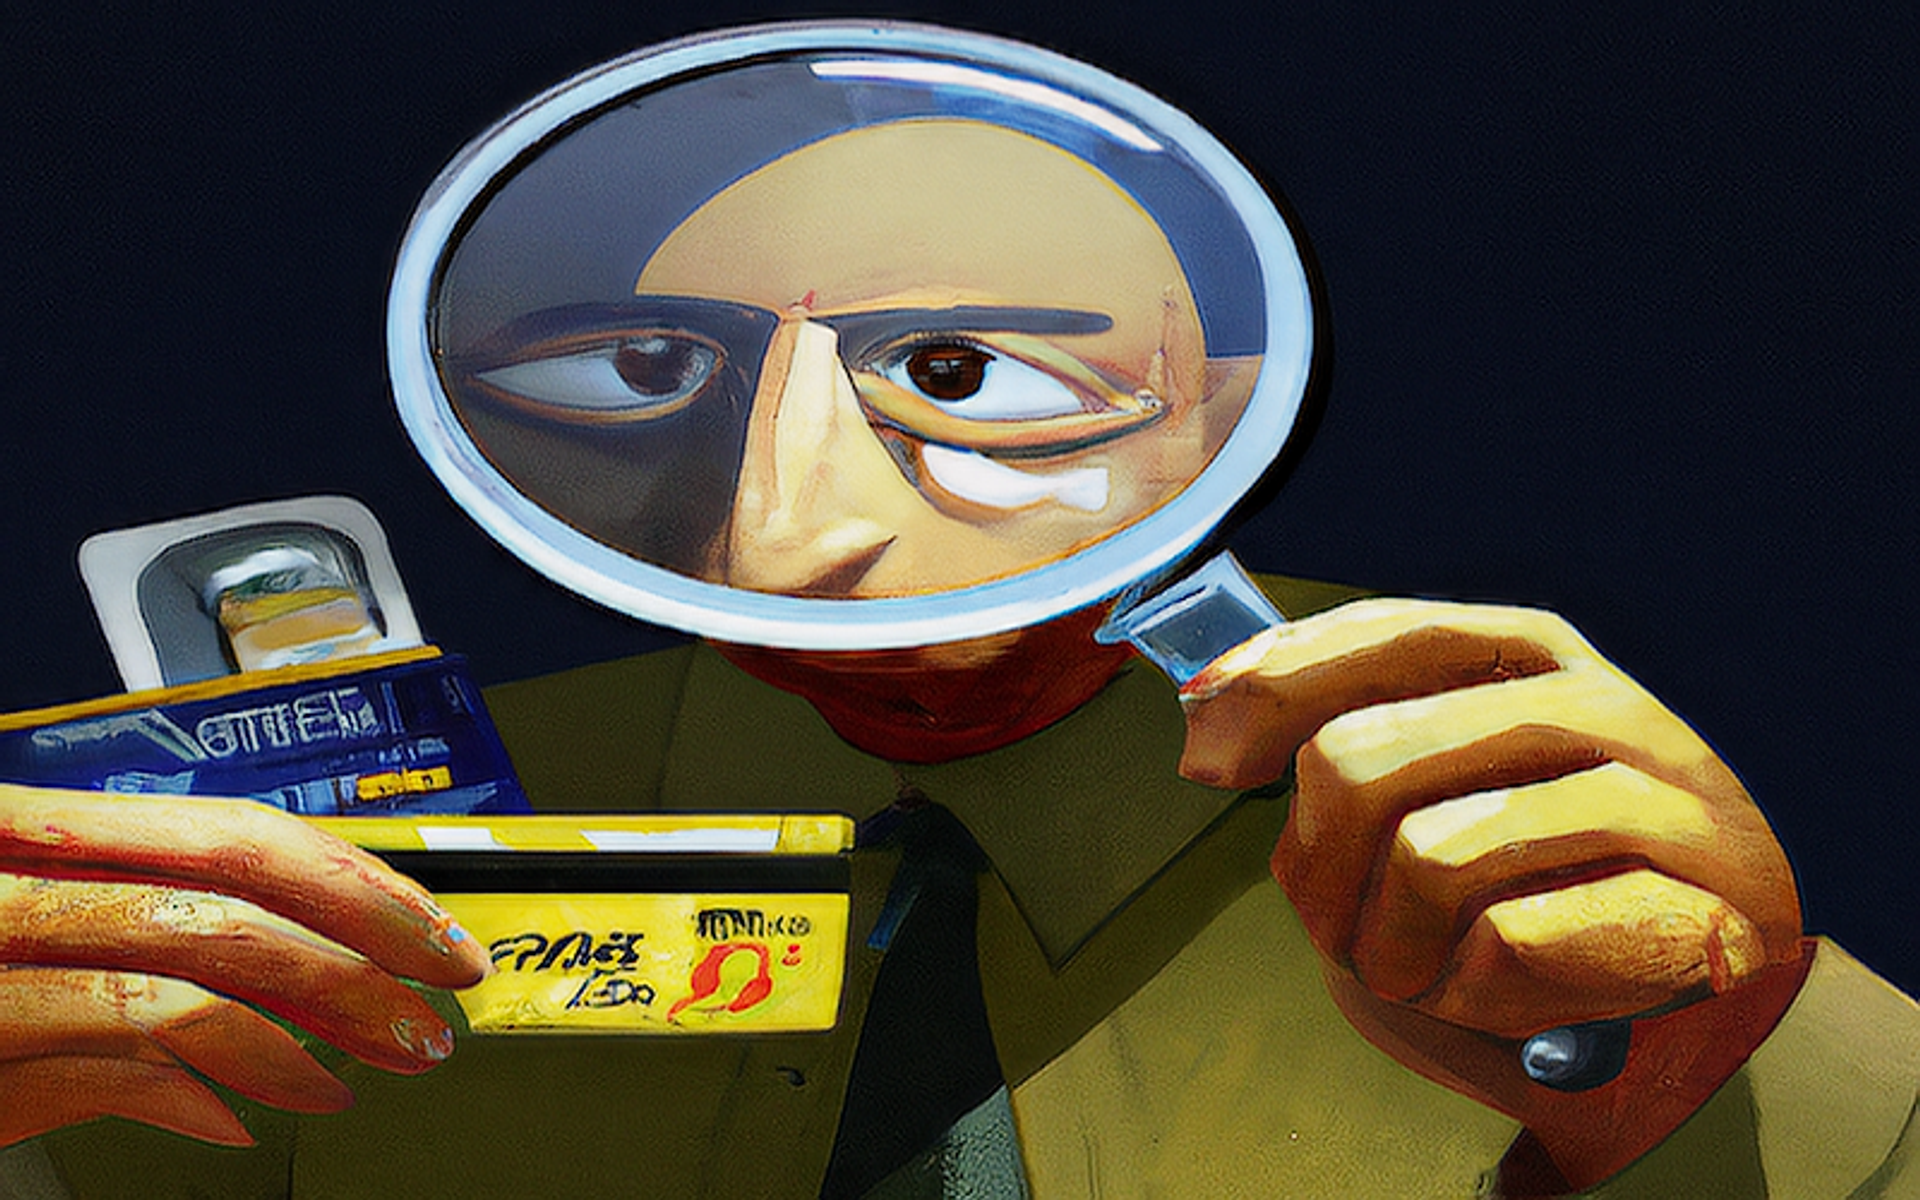 Digital art of an inspector analyzing his credit cards through a magnifying glass